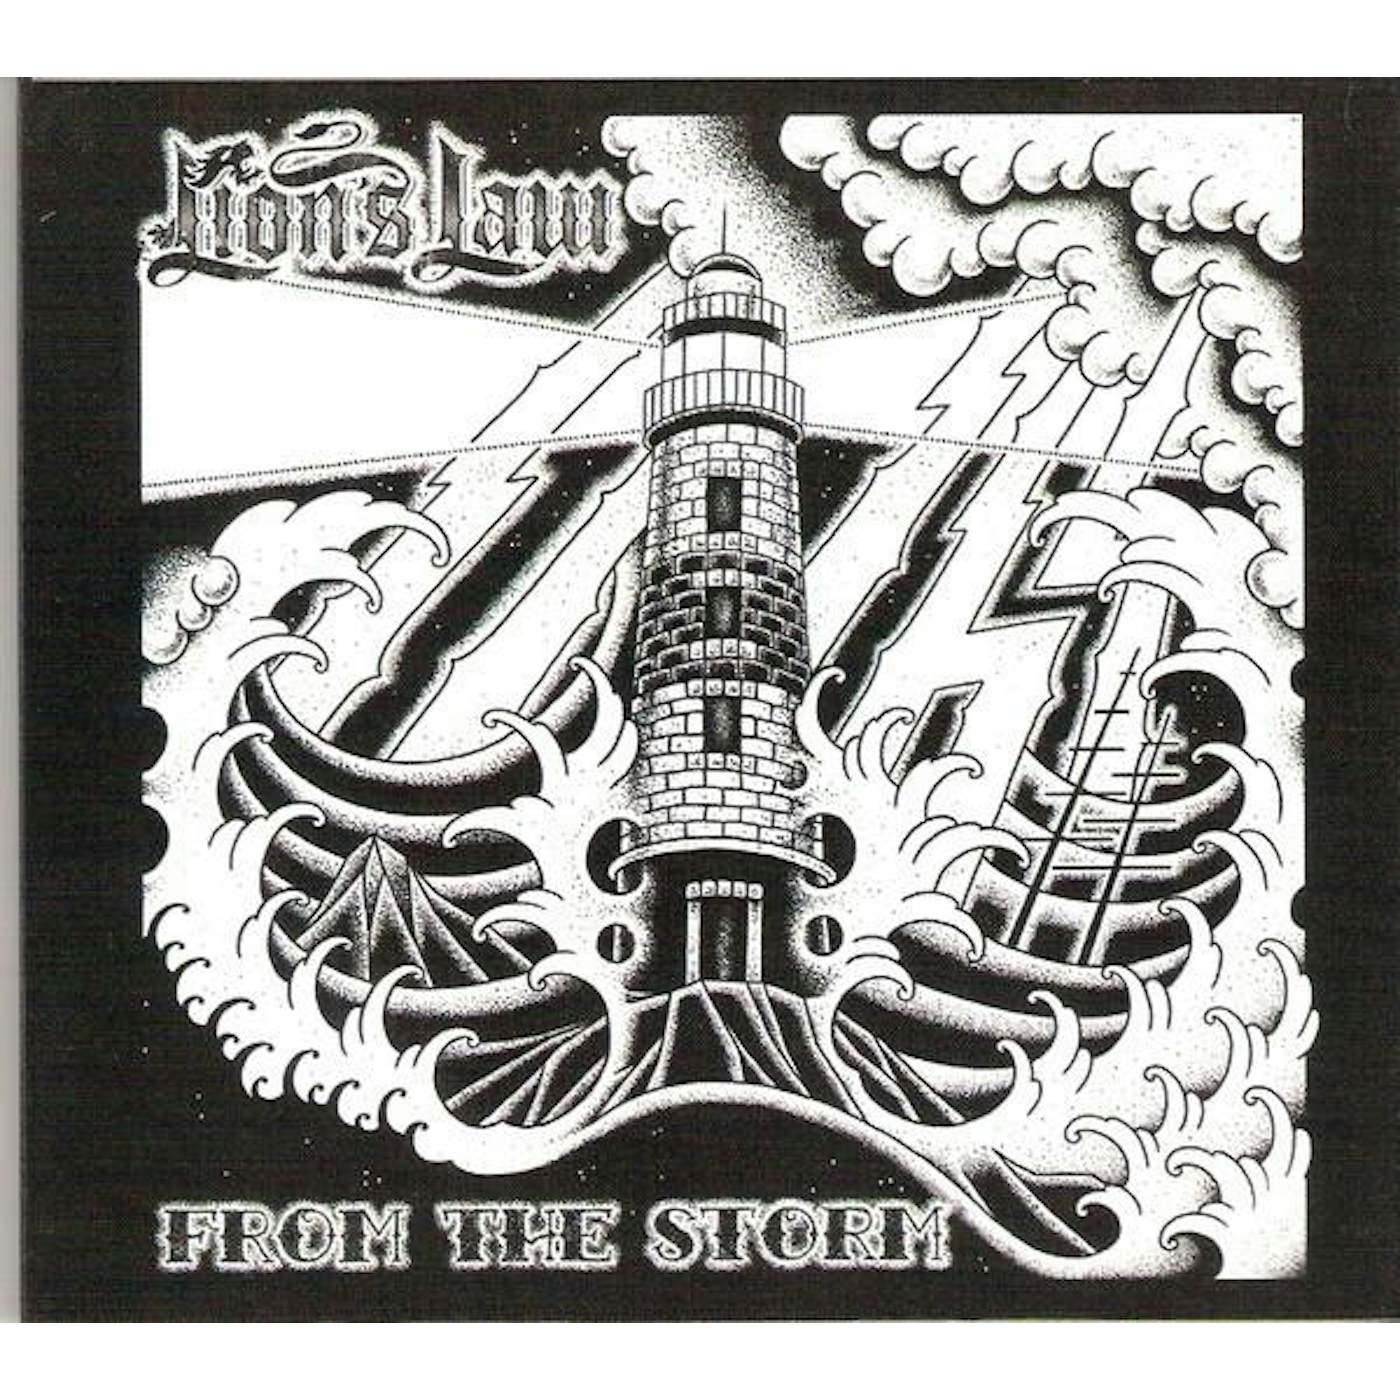 Lion's Law FROM THE STORM CD